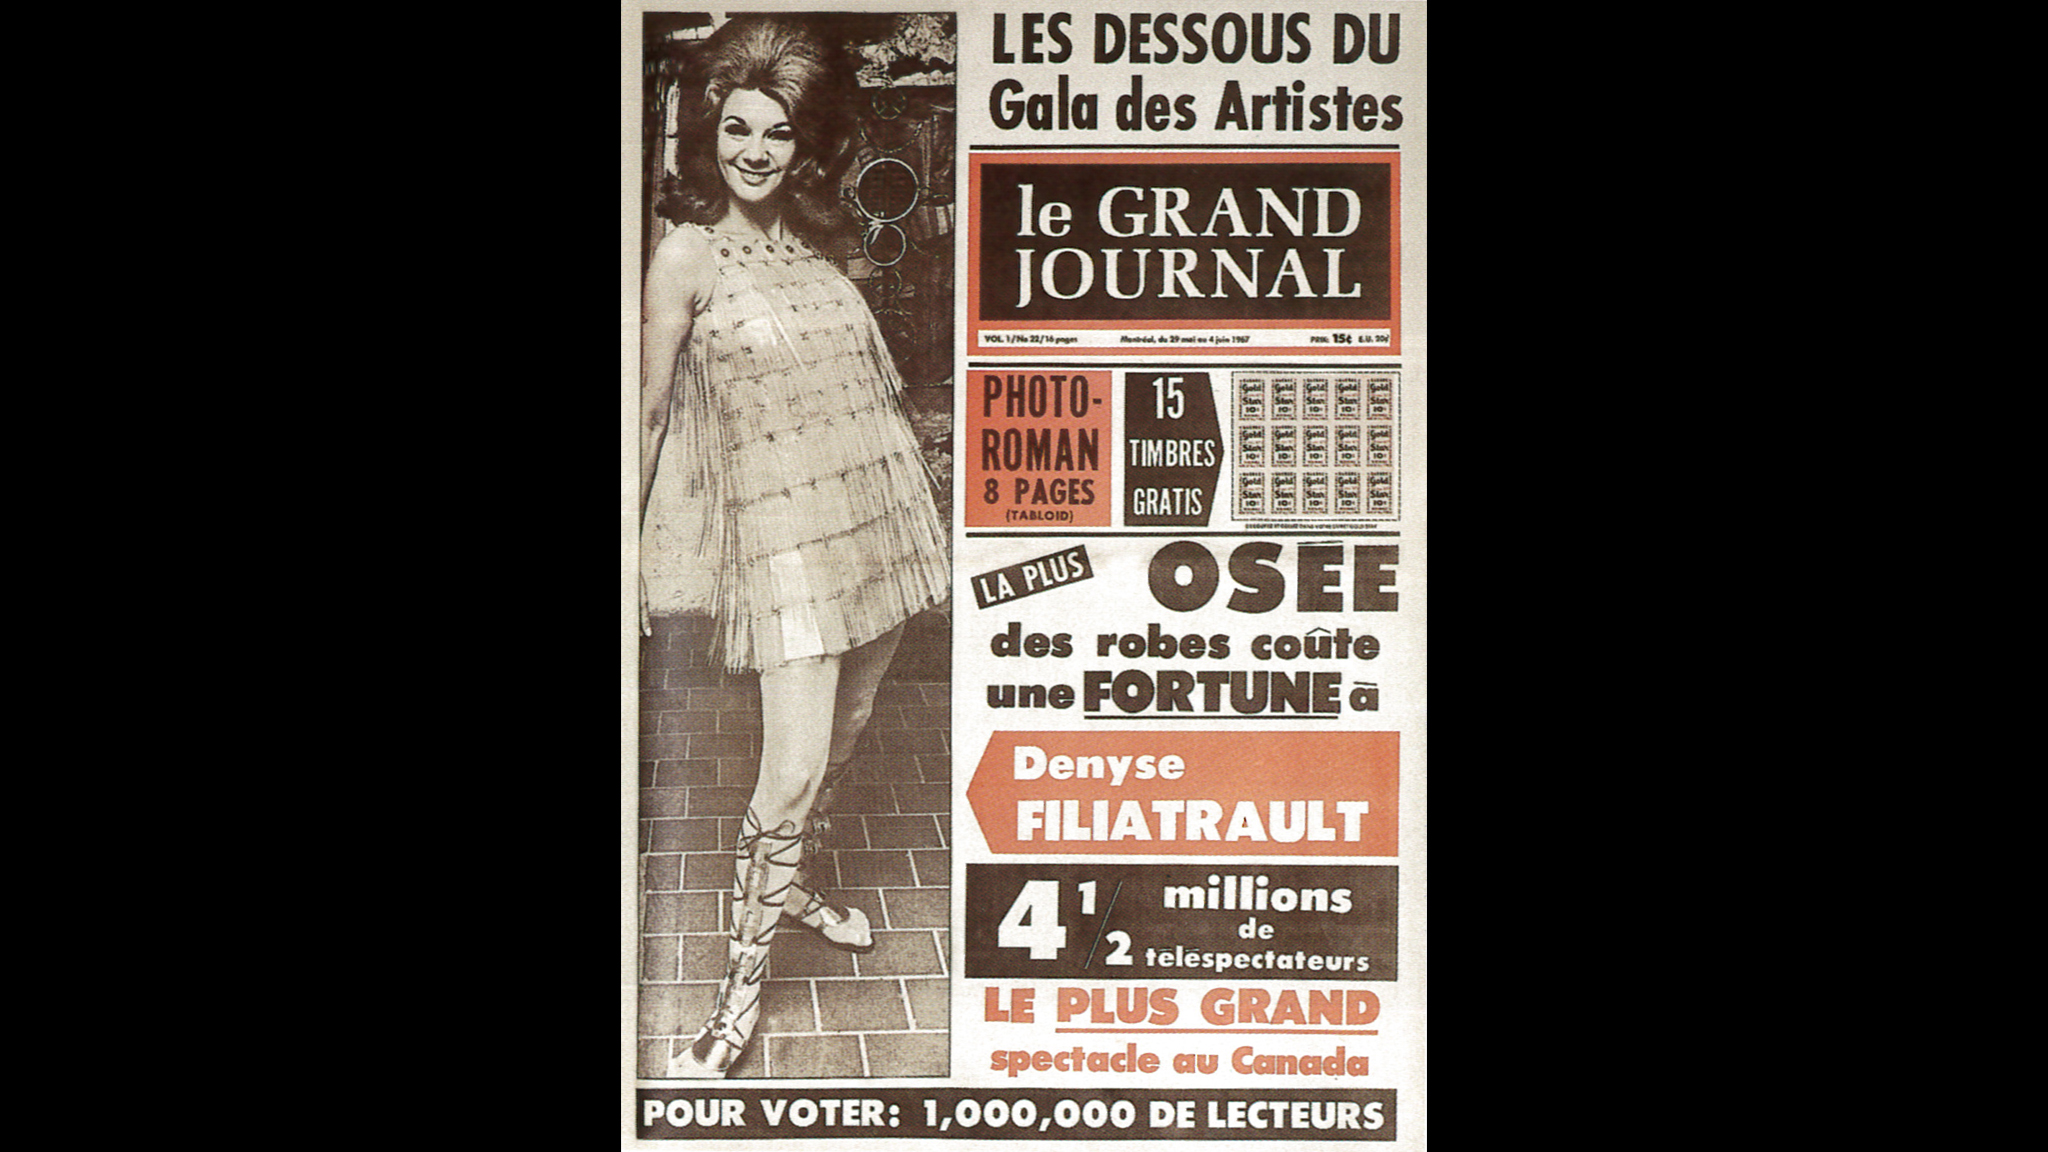 1955 – After launching the magazine Nouvelles et potins, Pierre Péladeau creates a string of celebrity weeklies, disturbing the political and religious elite of the day and laying the foundations for Québec’s own star system.